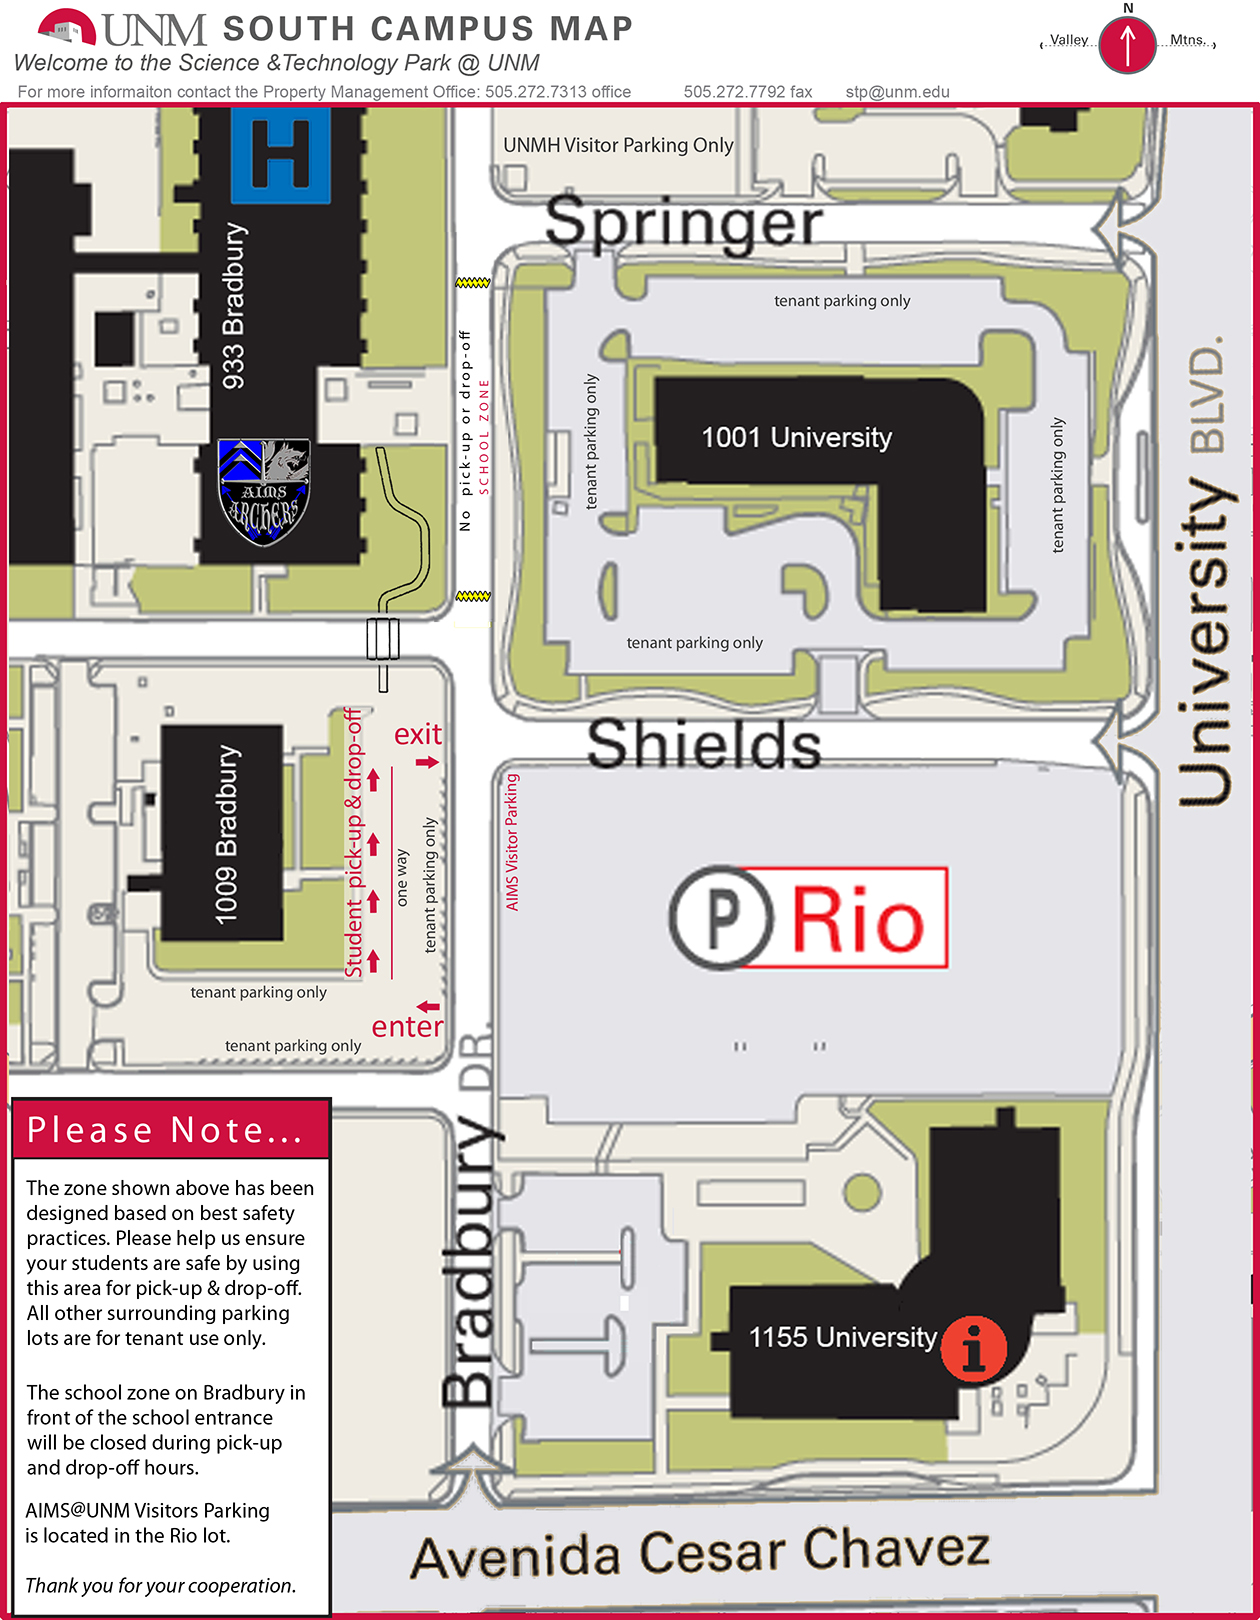 AIMS Parking Map